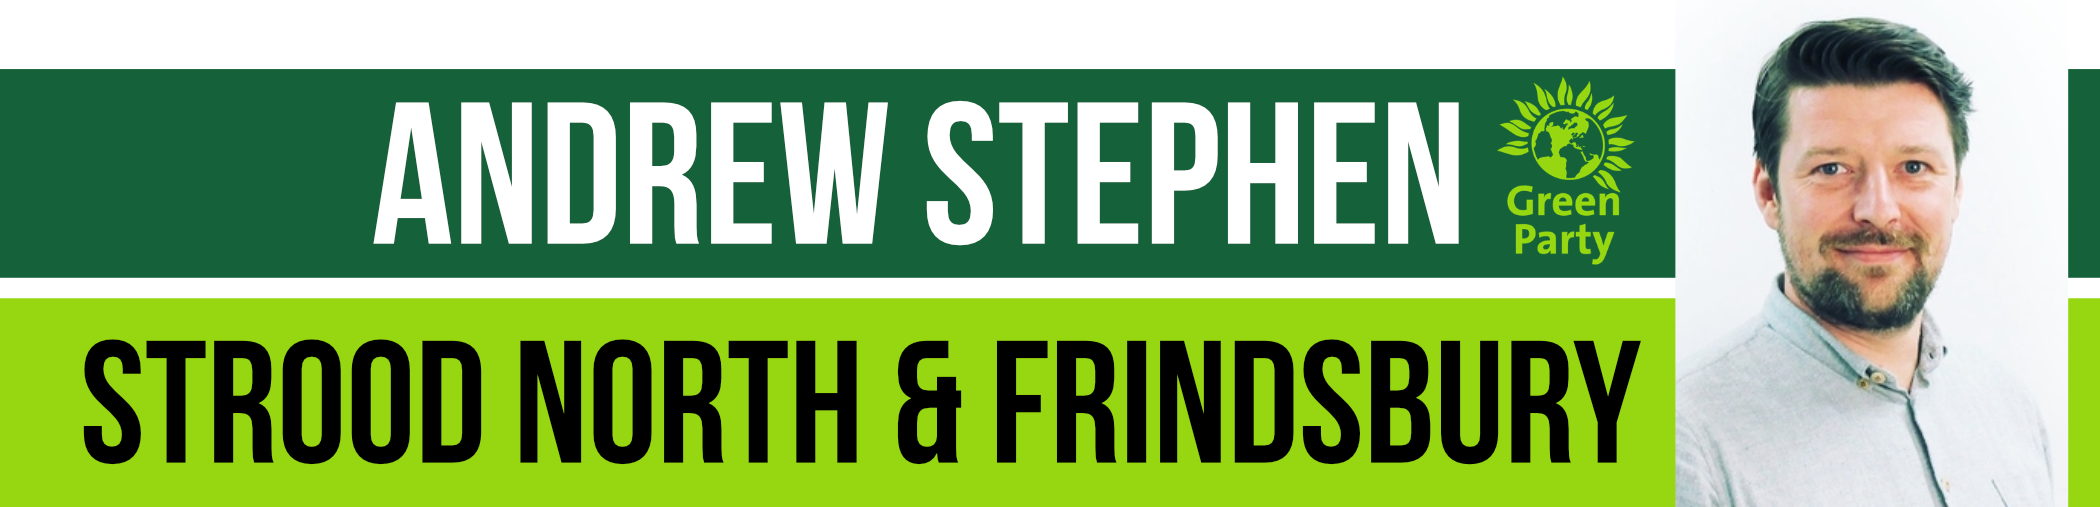 Andrew Stephen is the Green Party candidate for Strood North & Frindsbury Ward in May's Medway Council Elections